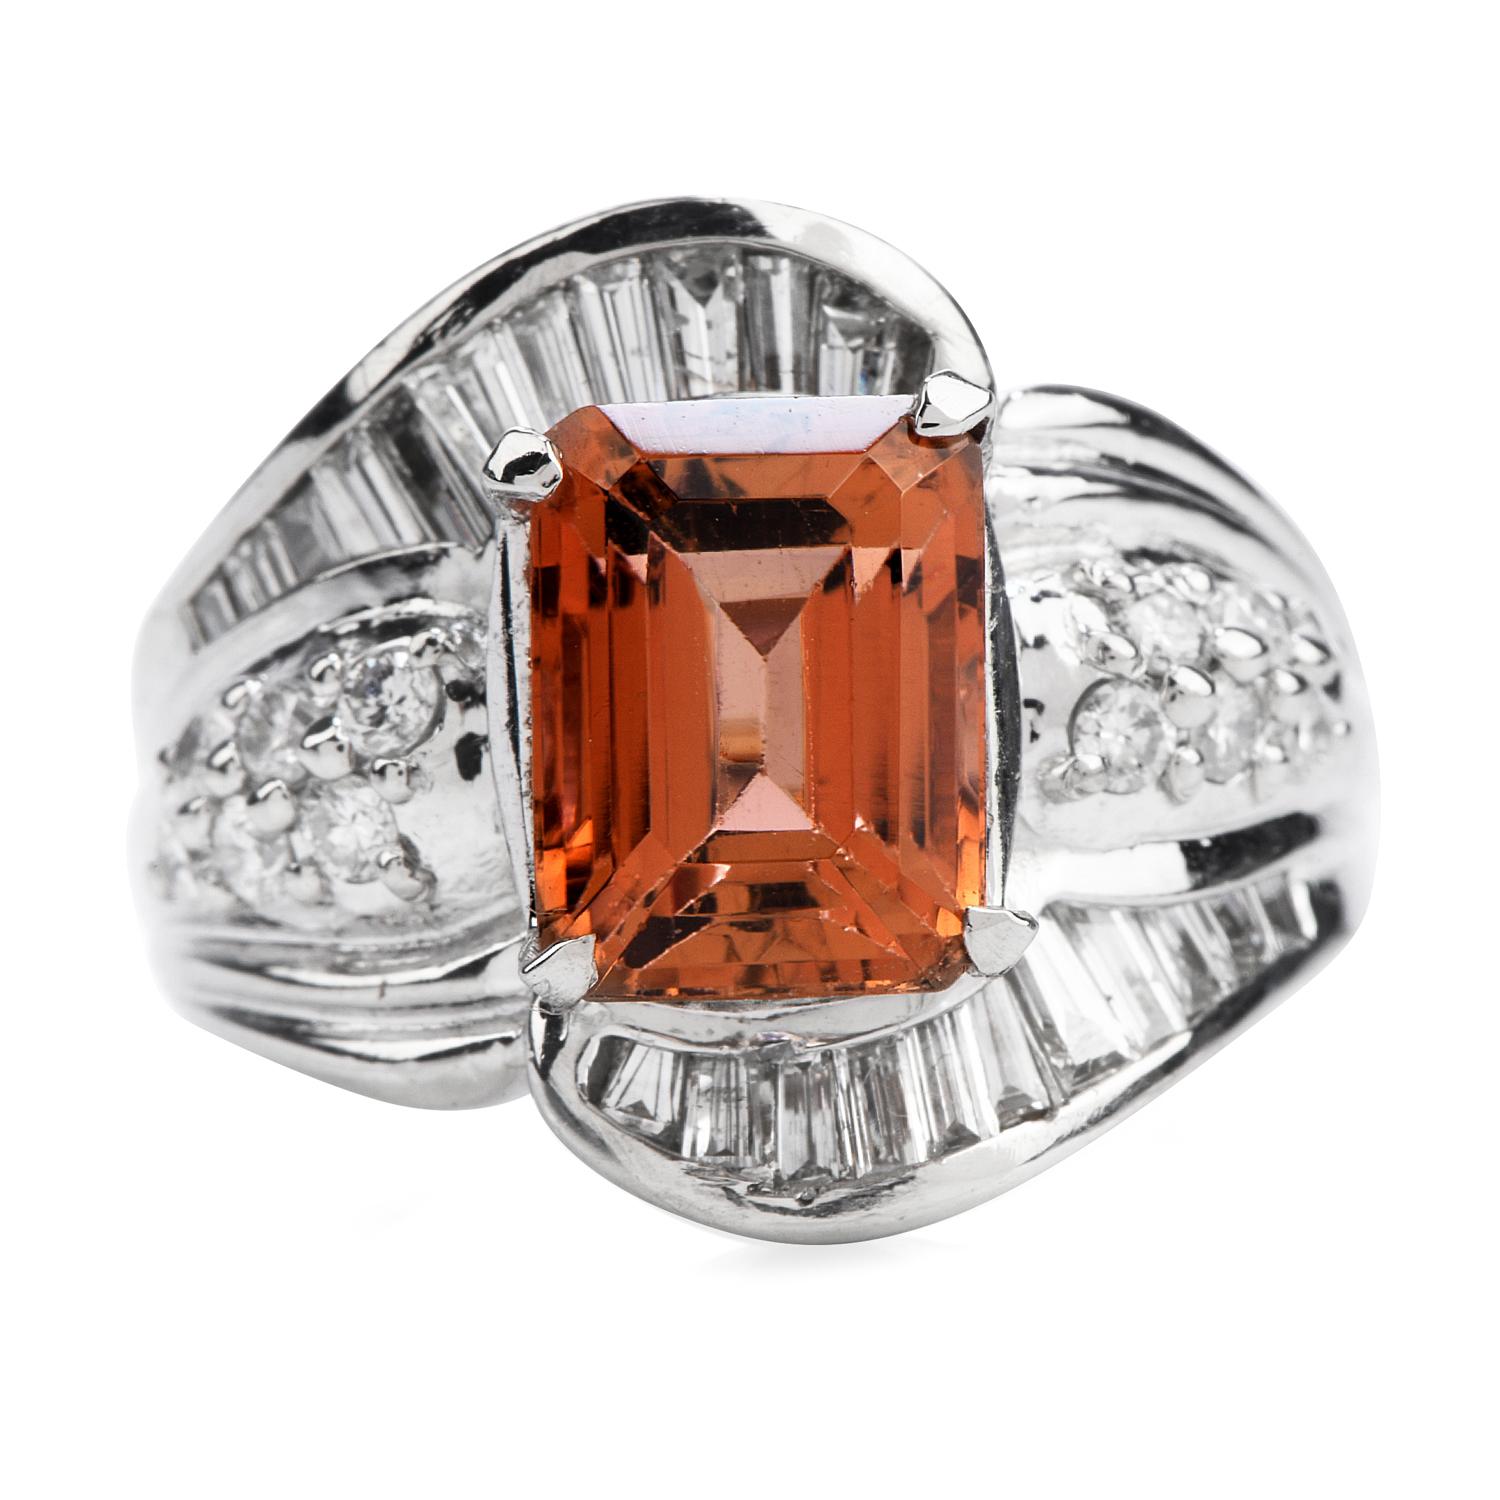 This sunset color orange Imperial Topaz Diamond Cocktail Ring is crafted in luxurious Platinum.

An emerald-cut natural Topaz adorns the center of this stately piece weighing approx. 3.44 carats. Round and baguette-cut diamonds wrap around the